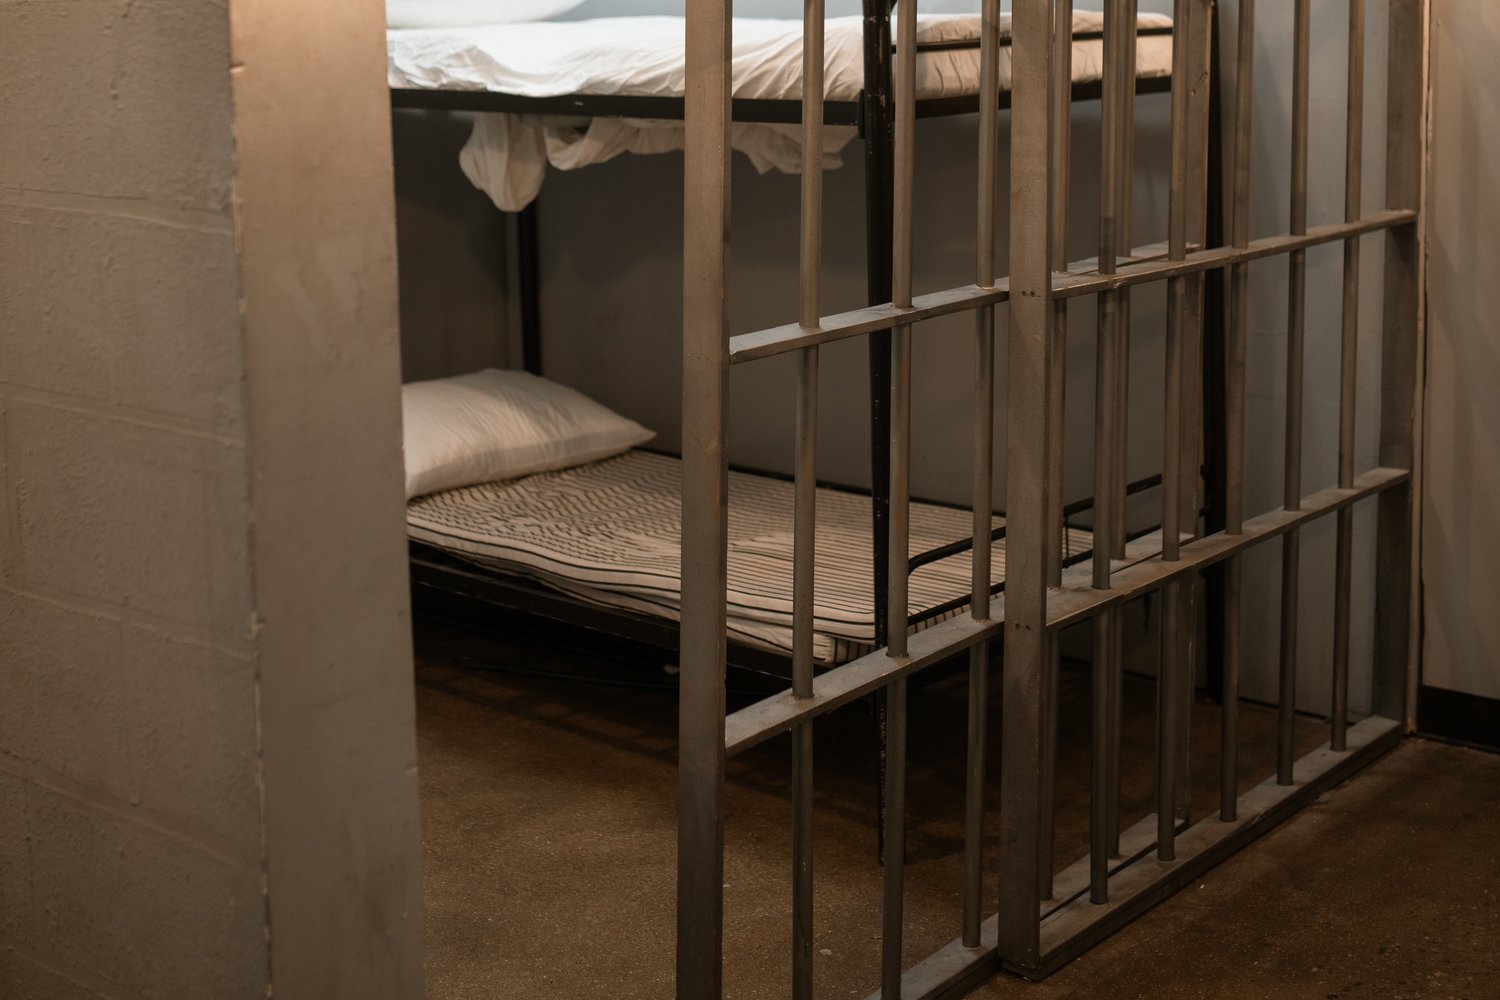 The Texas Commission on Jail Standards has determined the Harris County Jail is out of compliance because of the overcrowding situation, the Harris County Sheriff’s office said in a statement.